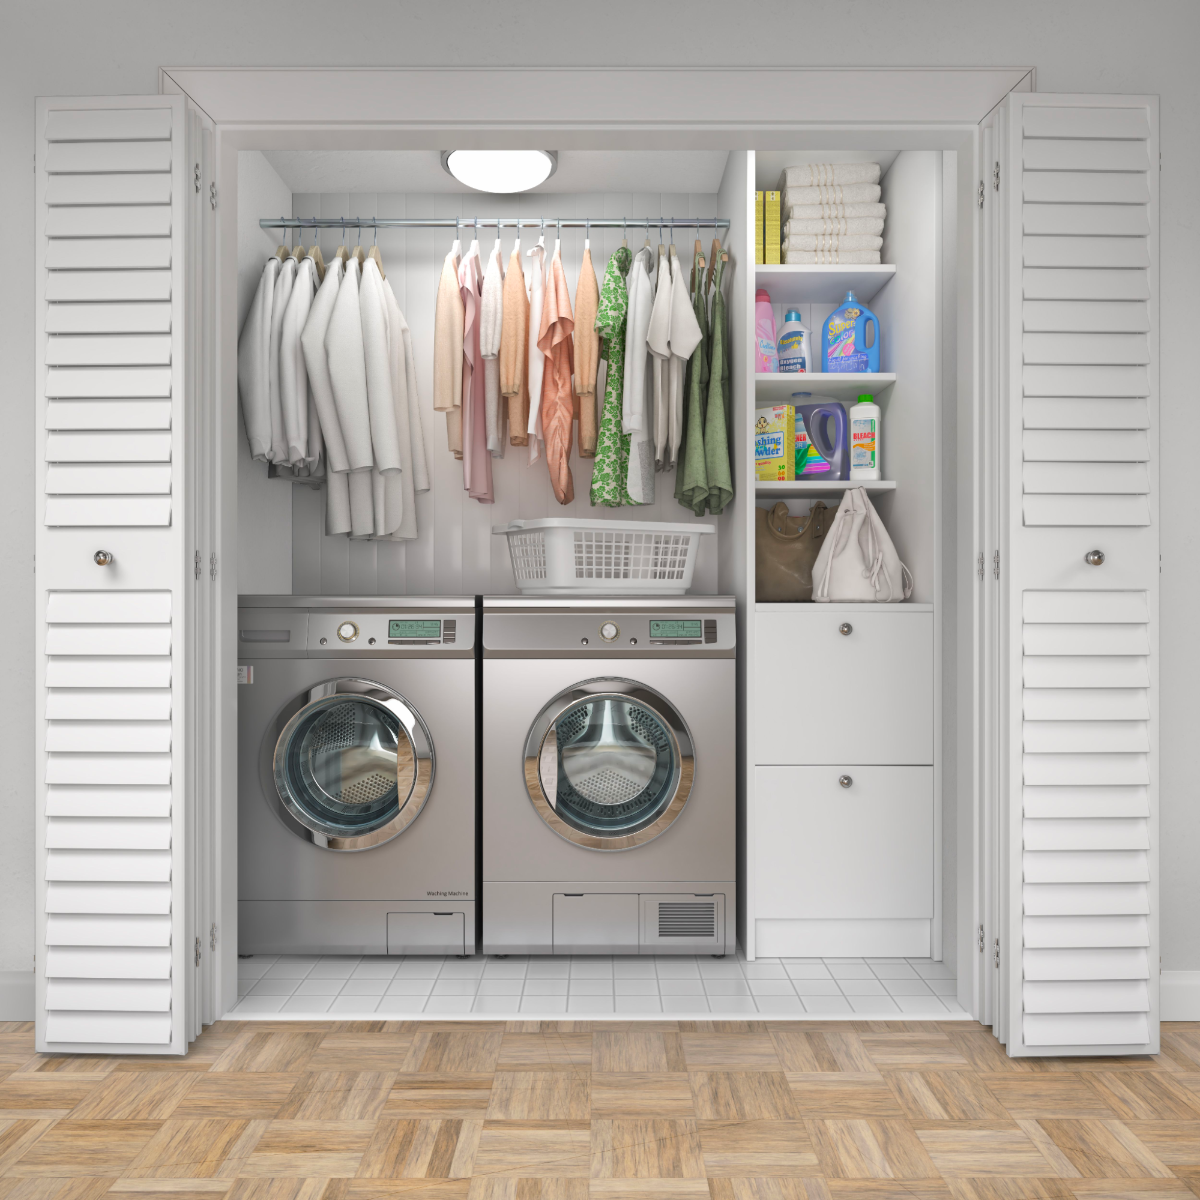 Small laundry room with washer and dryer side by side, hanging clothes above the appliances and detergents on shelving, enclosed by panelled doors